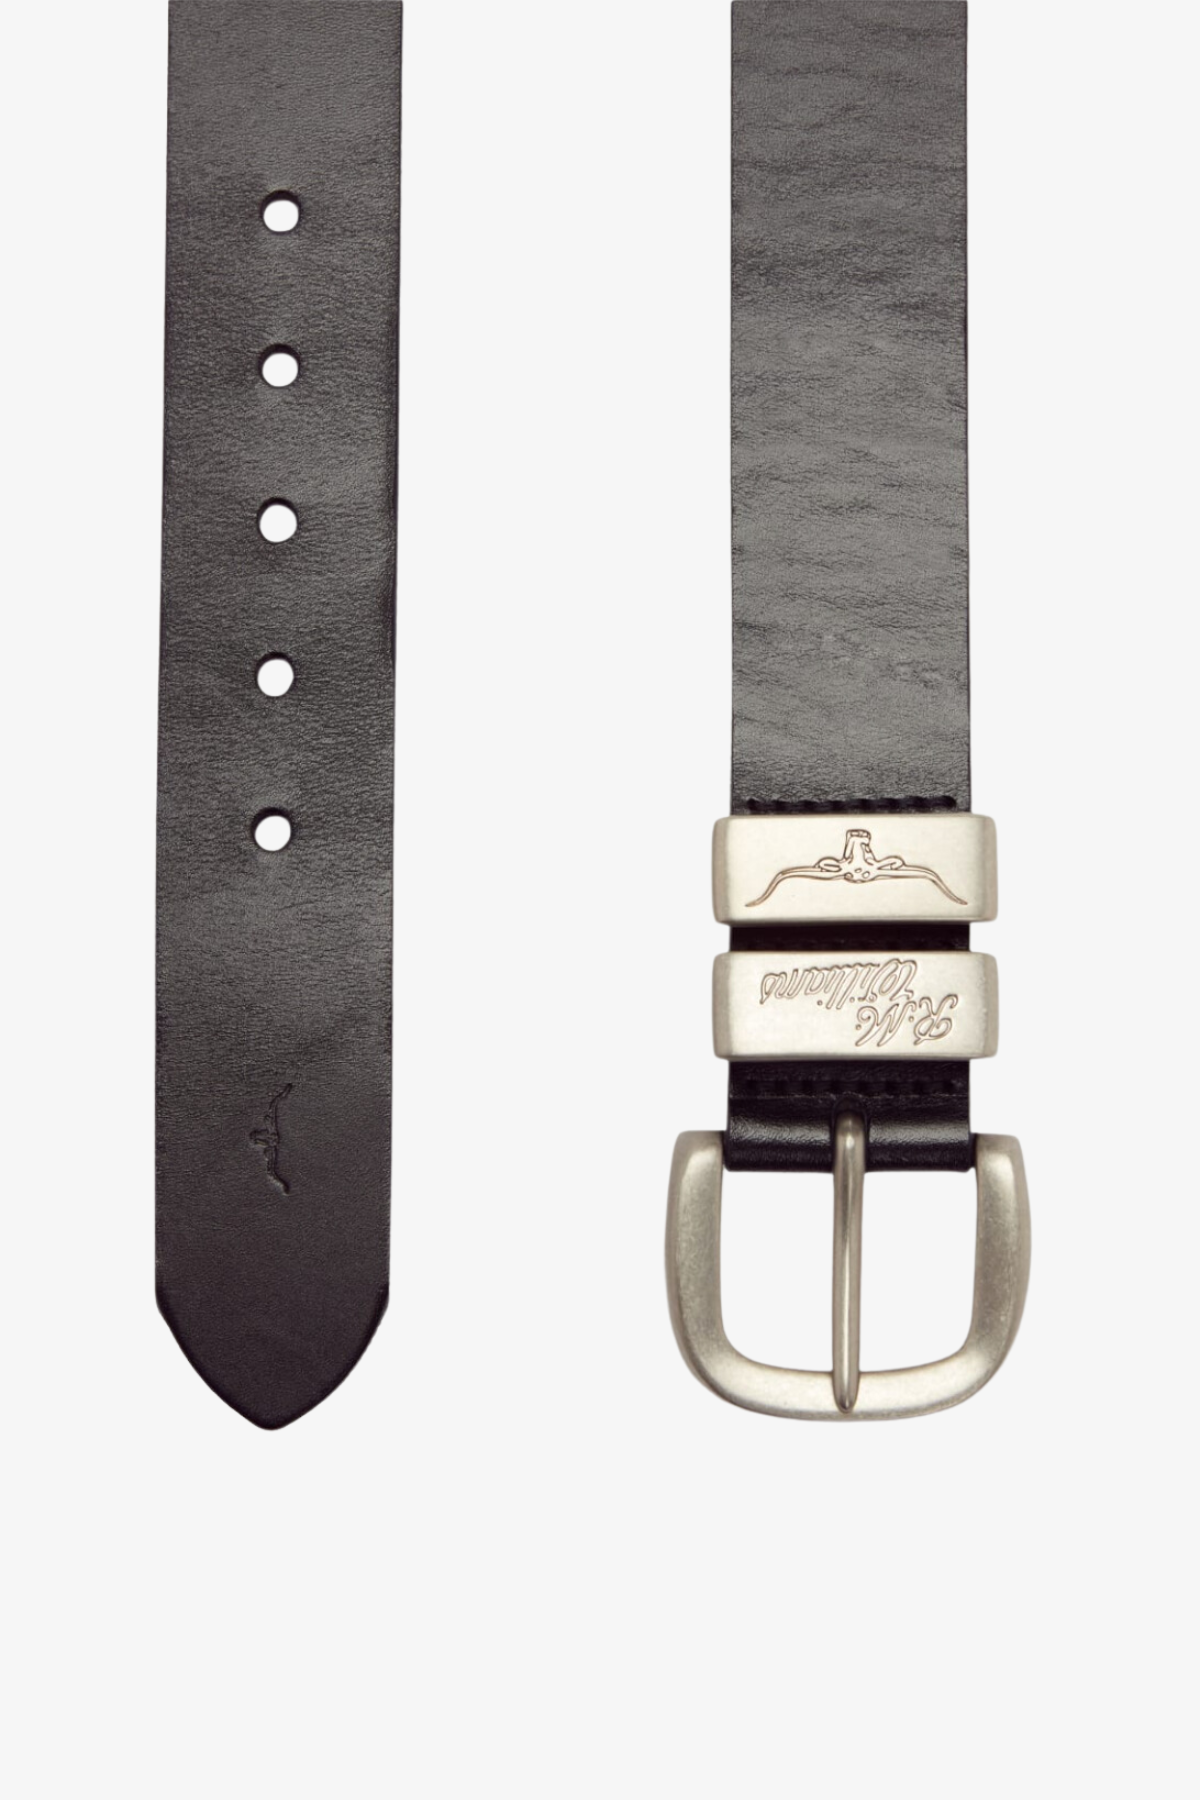 RM Williams Accessories: Belts - Mainstreet Clothing